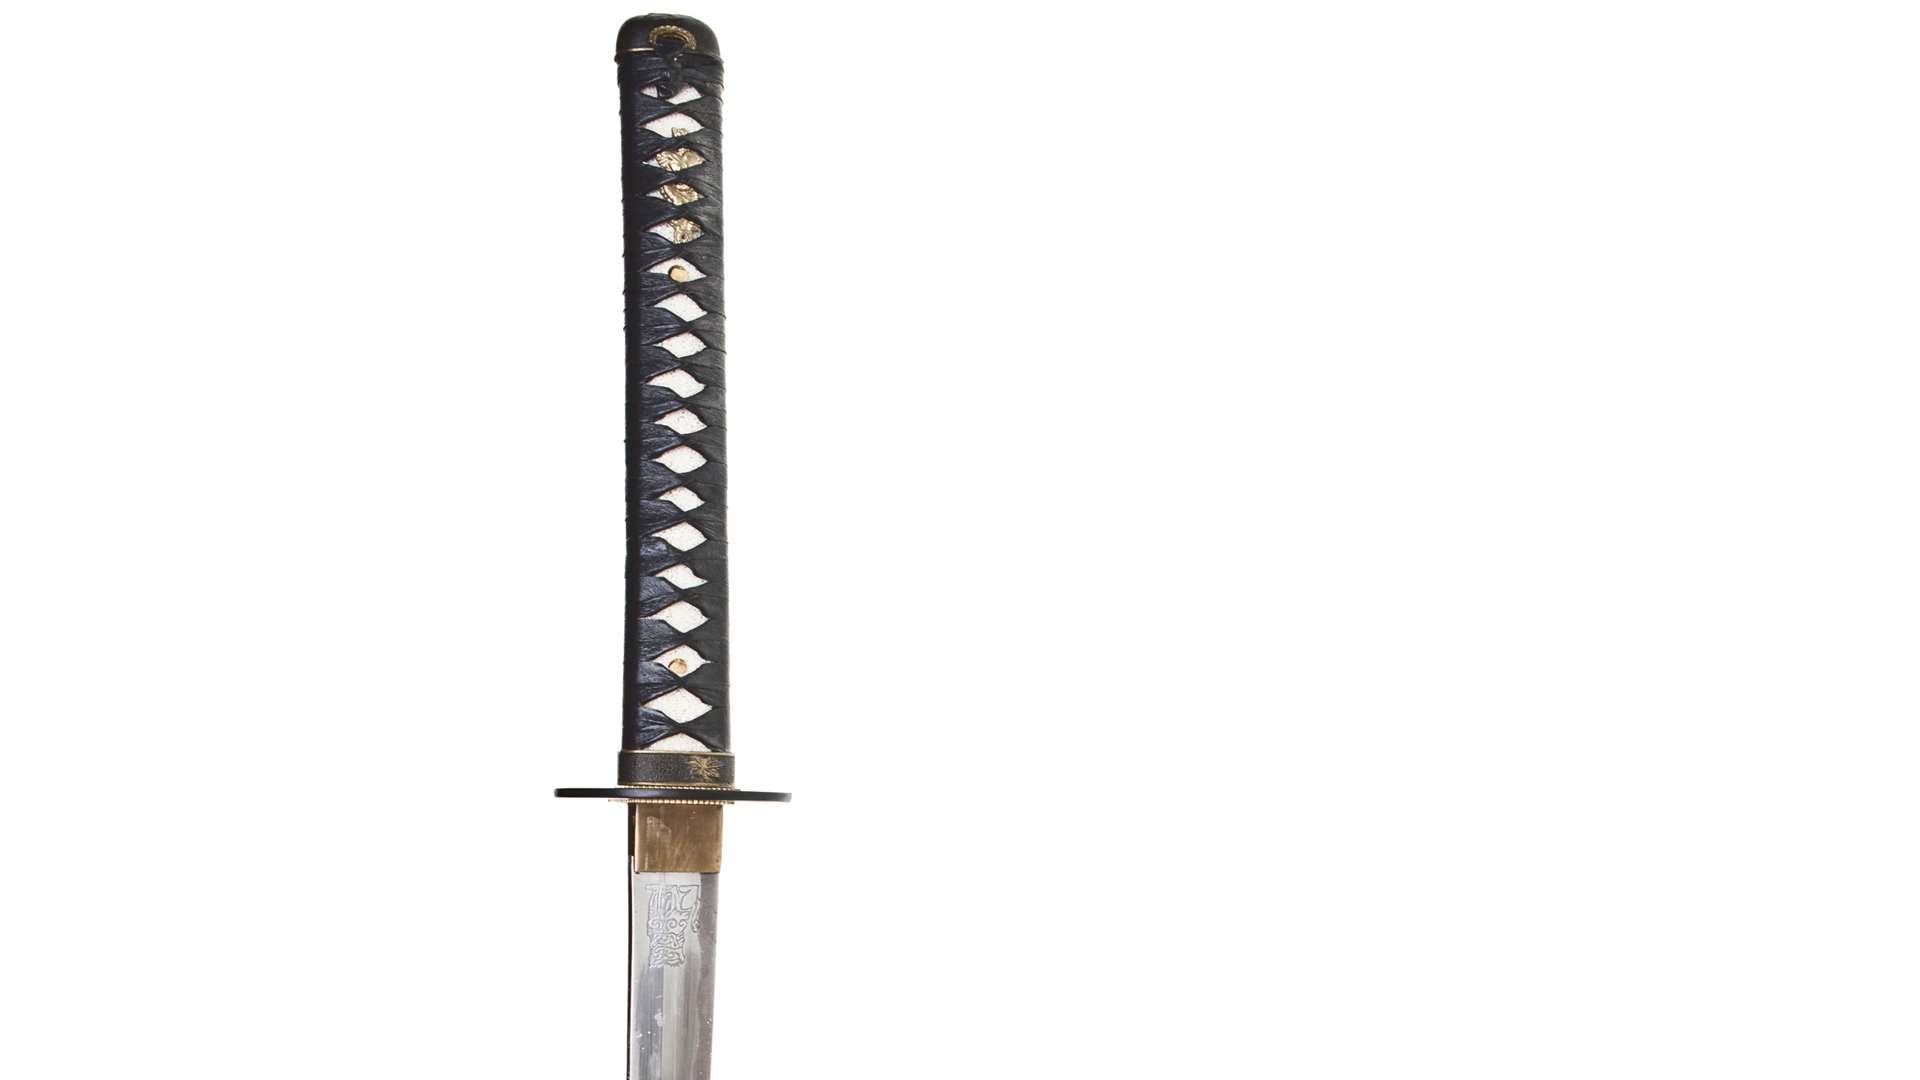 A Samurai sword similar to the one used by Bedford